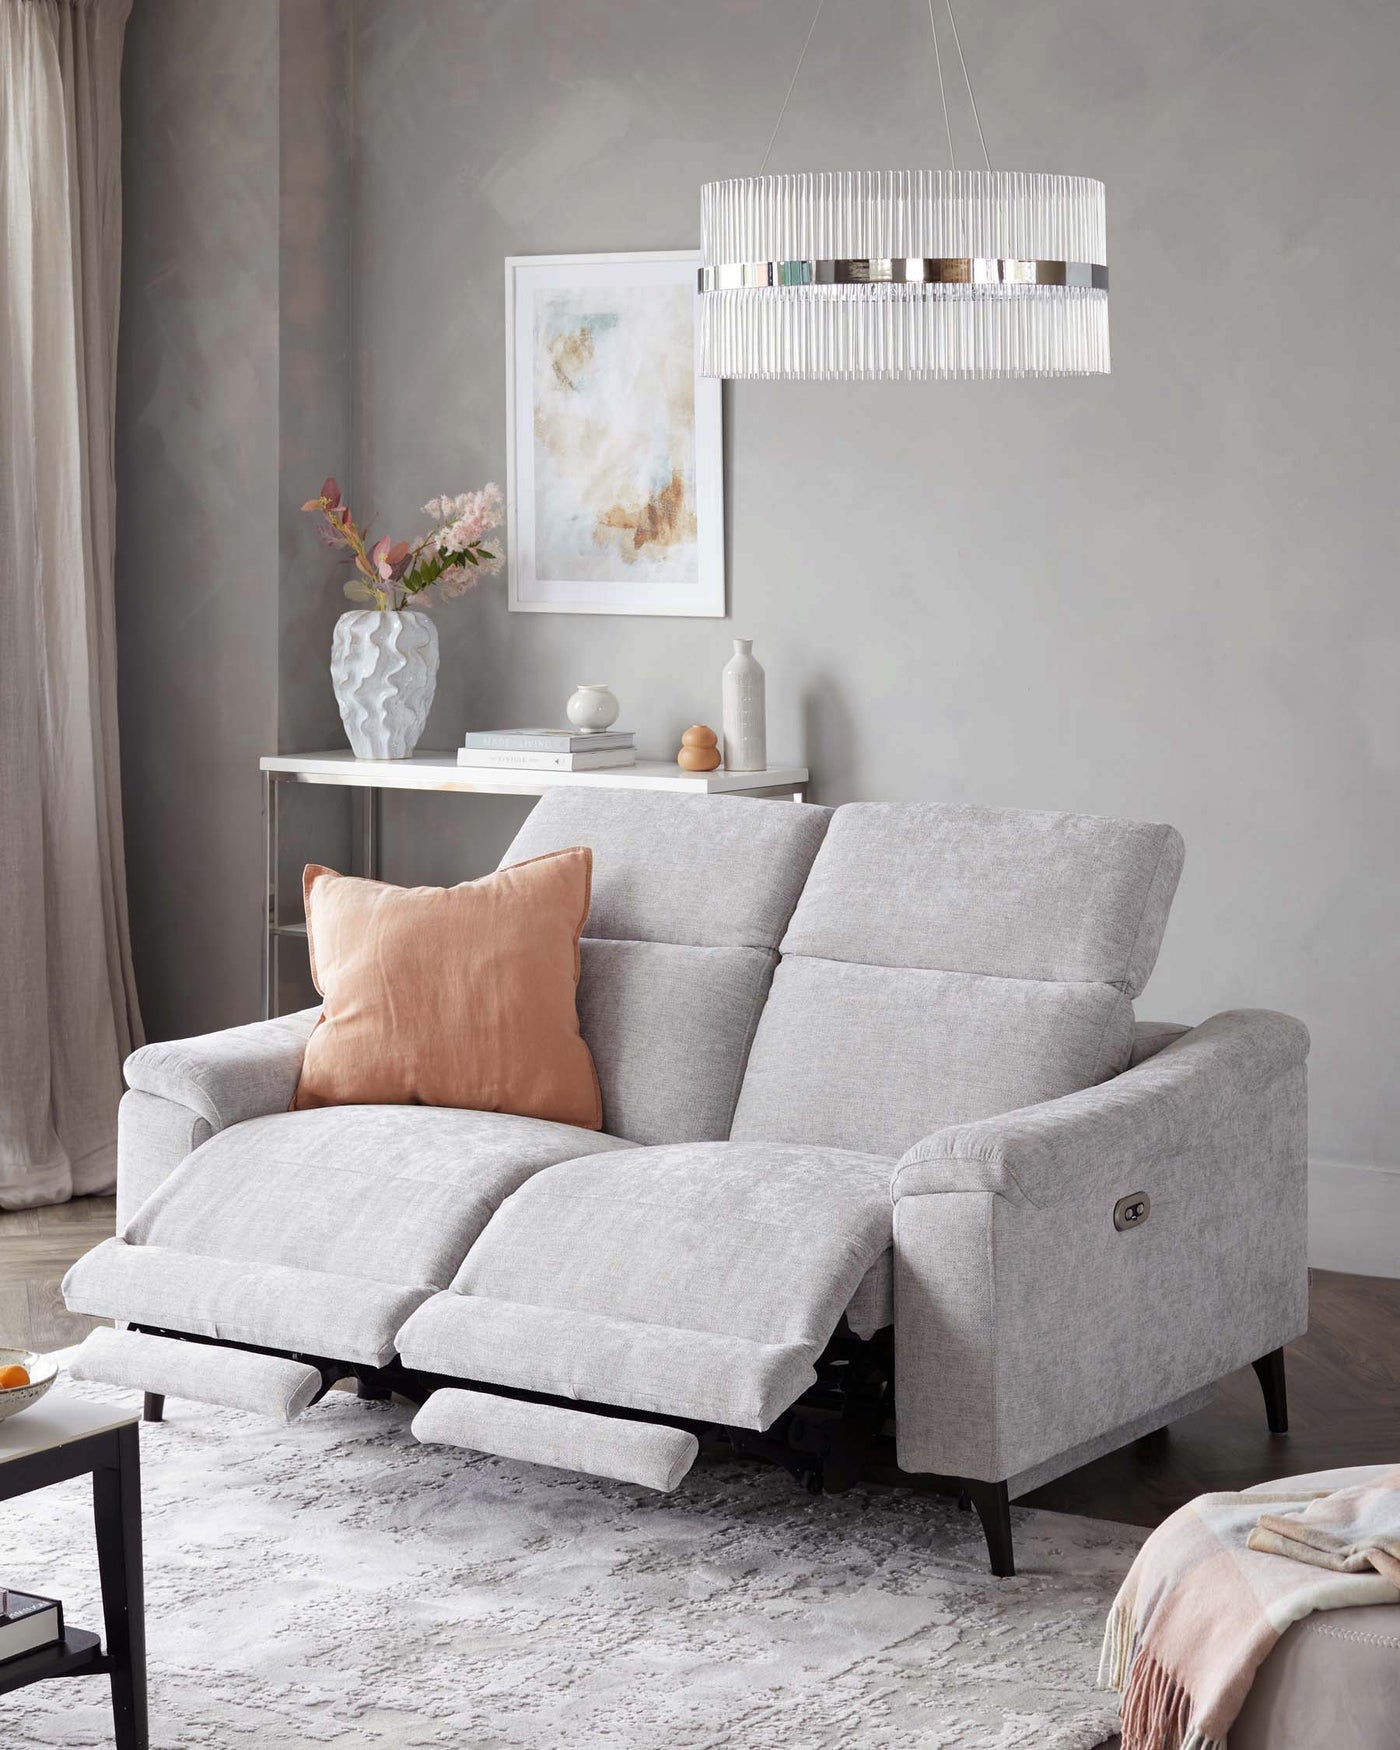 A light grey fabric sectional sofa with reclining footrests extended, complemented by pastel-coloured decorative pillows, set on a textured white area rug. Behind the sofa, a white console table decorates the room alongside a white vase with pink flowers, ceramic decor, and books, under a framed abstract art piece. Above the setting hangs a contemporary chandelier with vertical fringe elements.